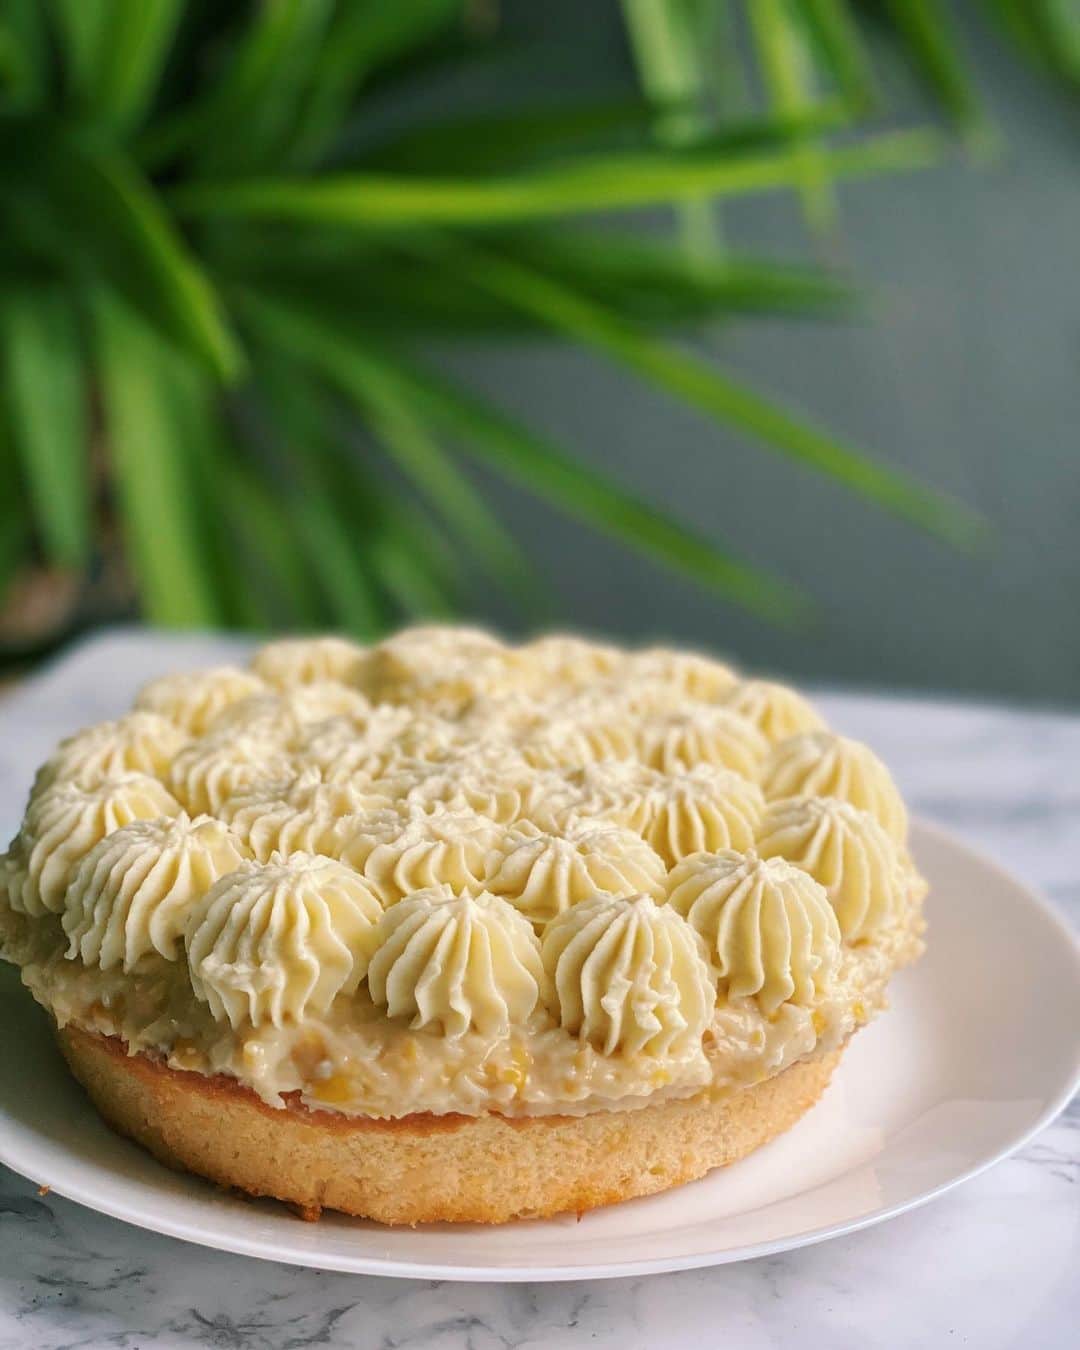 Antonietteのインスタグラム：「I’m all ears 🌽 when it comes to corn, and was excited that @goodcookiecompany was offering a very limited, seasonal summer corn cake with coconut milk custard and corn and coconut jam! The perfect cake to end the hubs birthday weekend..he loved it! 👌🏽 Summer in every bite ☀️ minus the surf, sand and Baywatch lifeguard David Hasselhoff running slow motion across the beach. 😜 🏖 🏄」